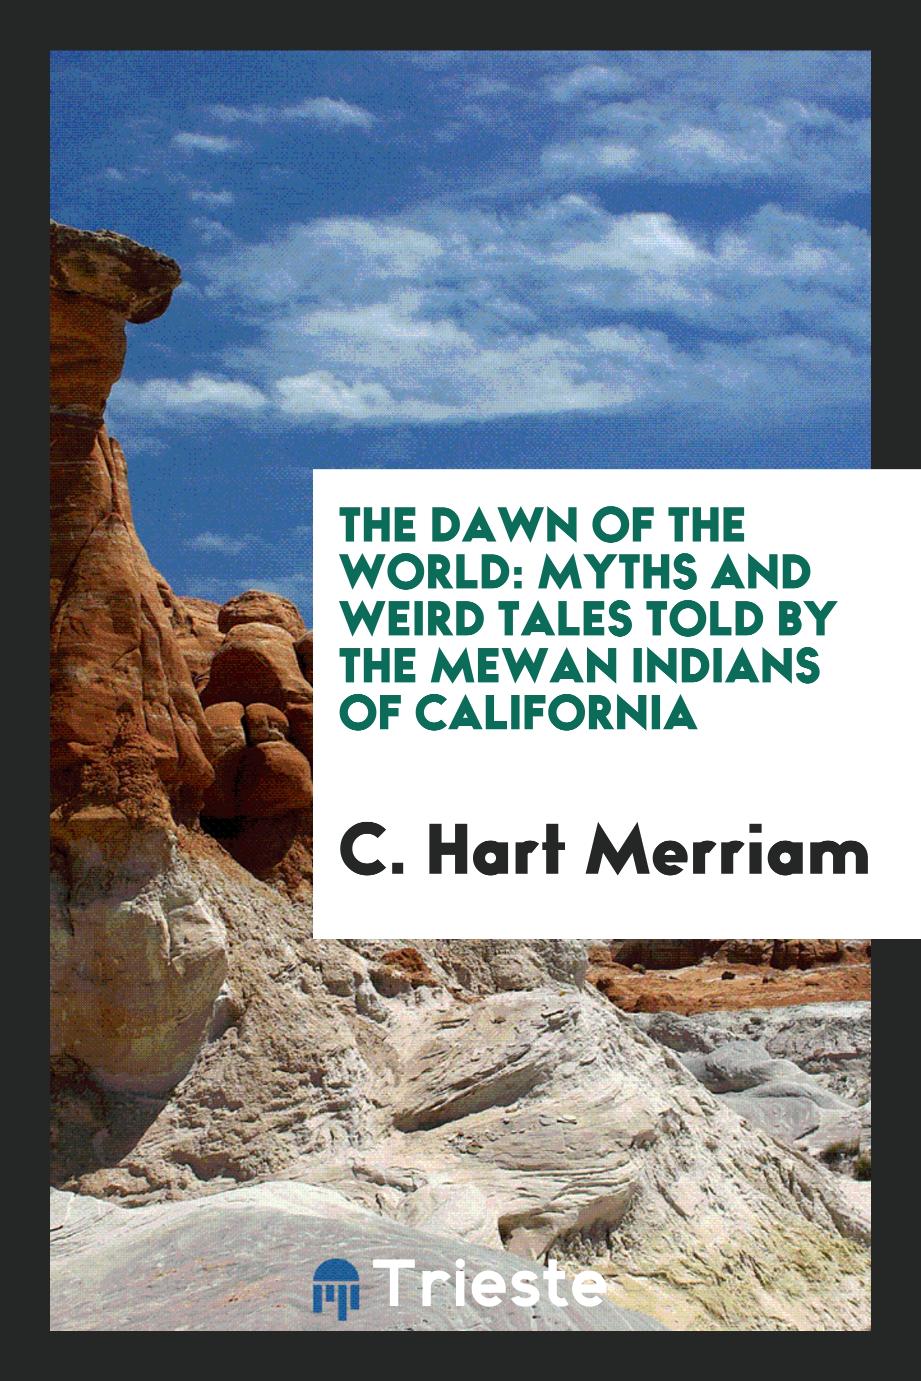 The dawn of the world: myths and weird tales told by the Mewan Indians of California